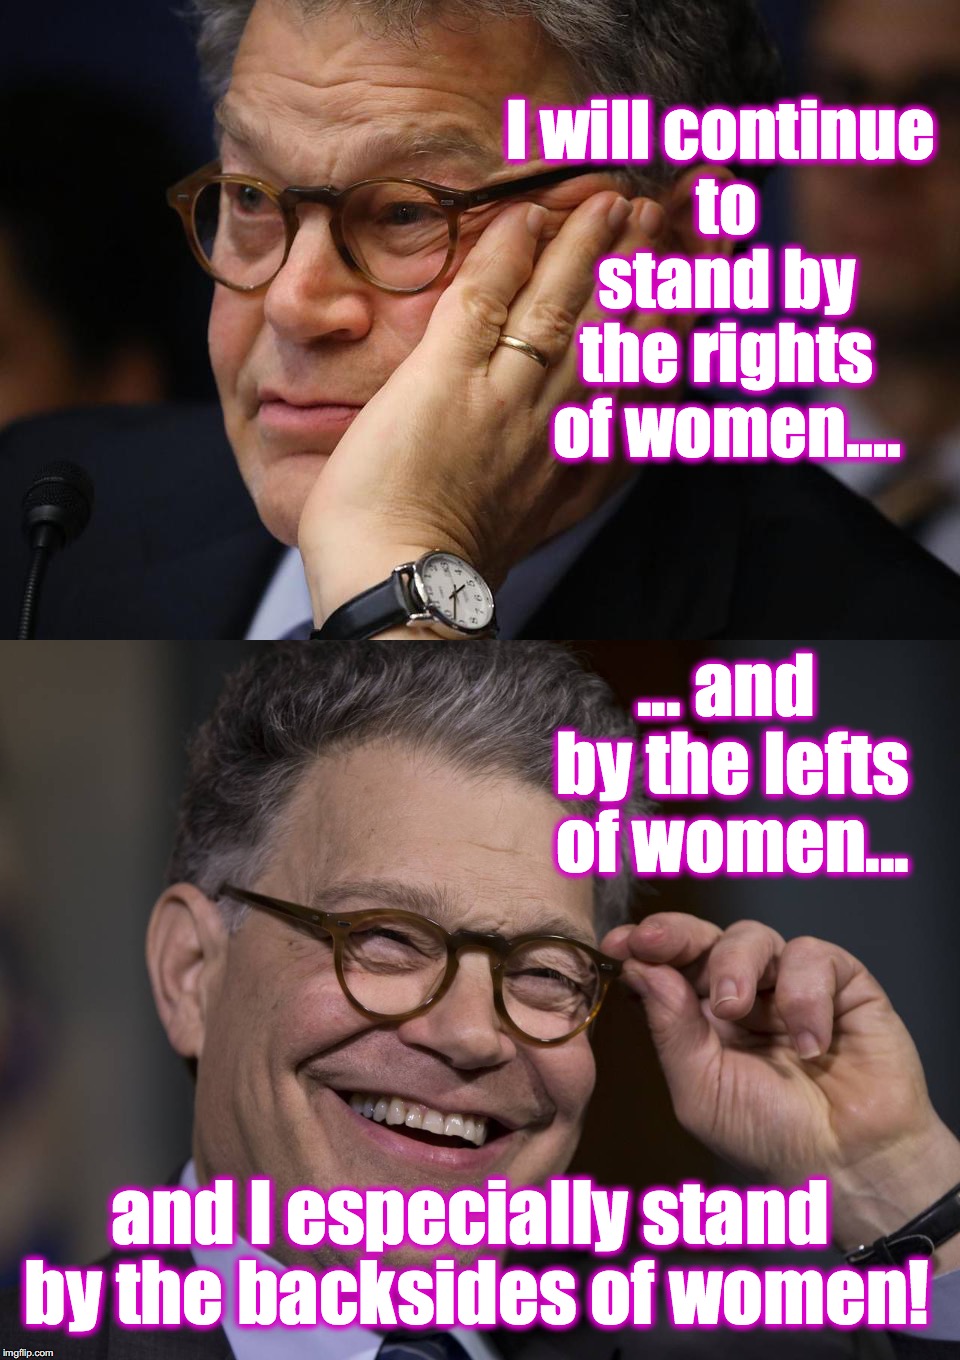 I will continue to stand by the rights of women.... ... and by the lefts of women... and I especially stand by the backsides of women! | image tagged in al franken,women's rights | made w/ Imgflip meme maker